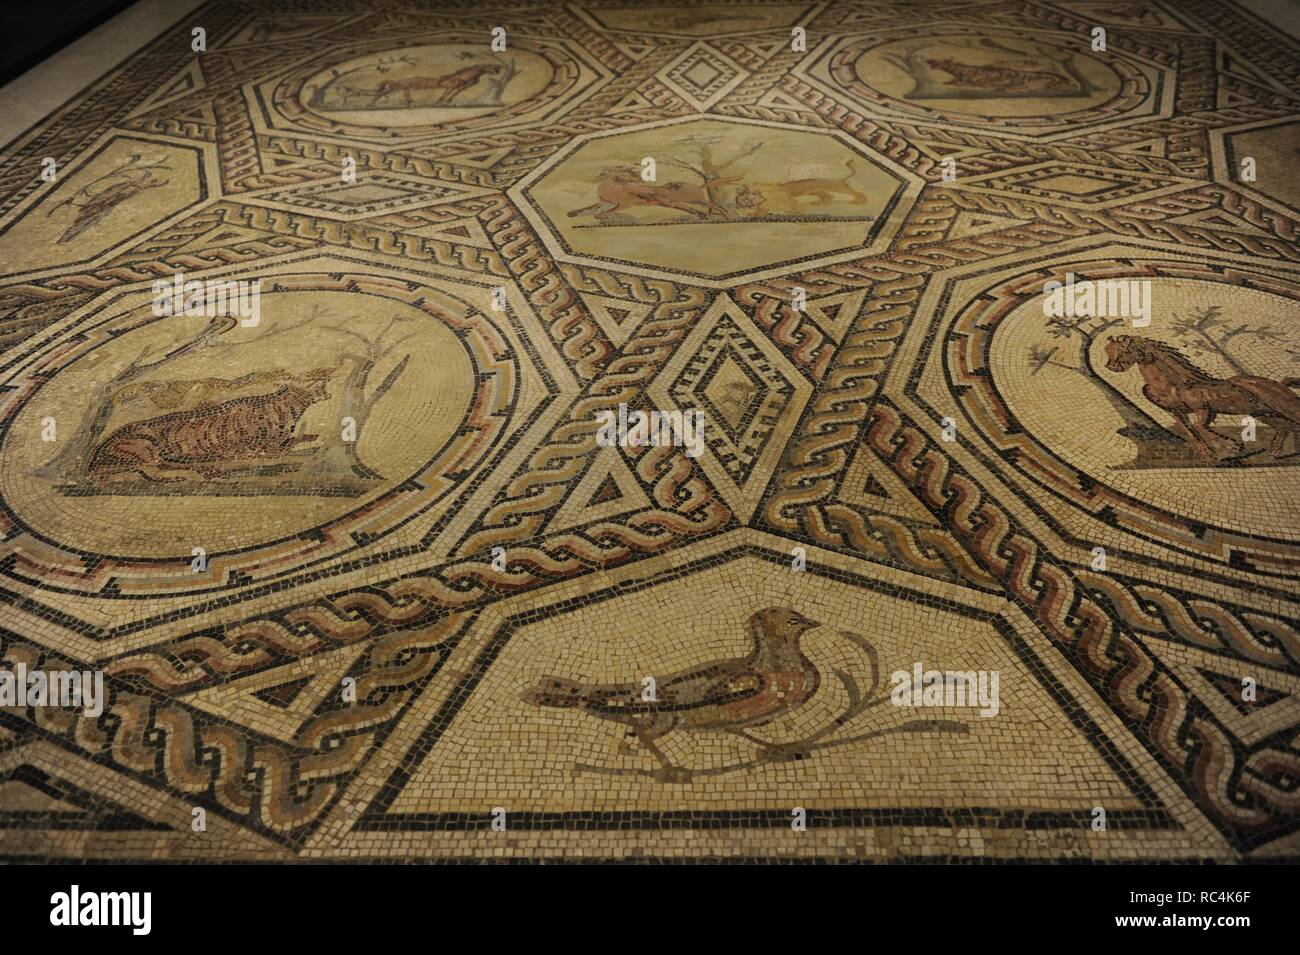 Floor mosaic from a Roman house in Trier, 250. Stone and glass mosaics. Polychrome. Decorated with borders and animals. Artwork loaned by  Rheinisches Landesmuseum, Trier). The German Historical Museum. Berlin. Germany. Stock Photo